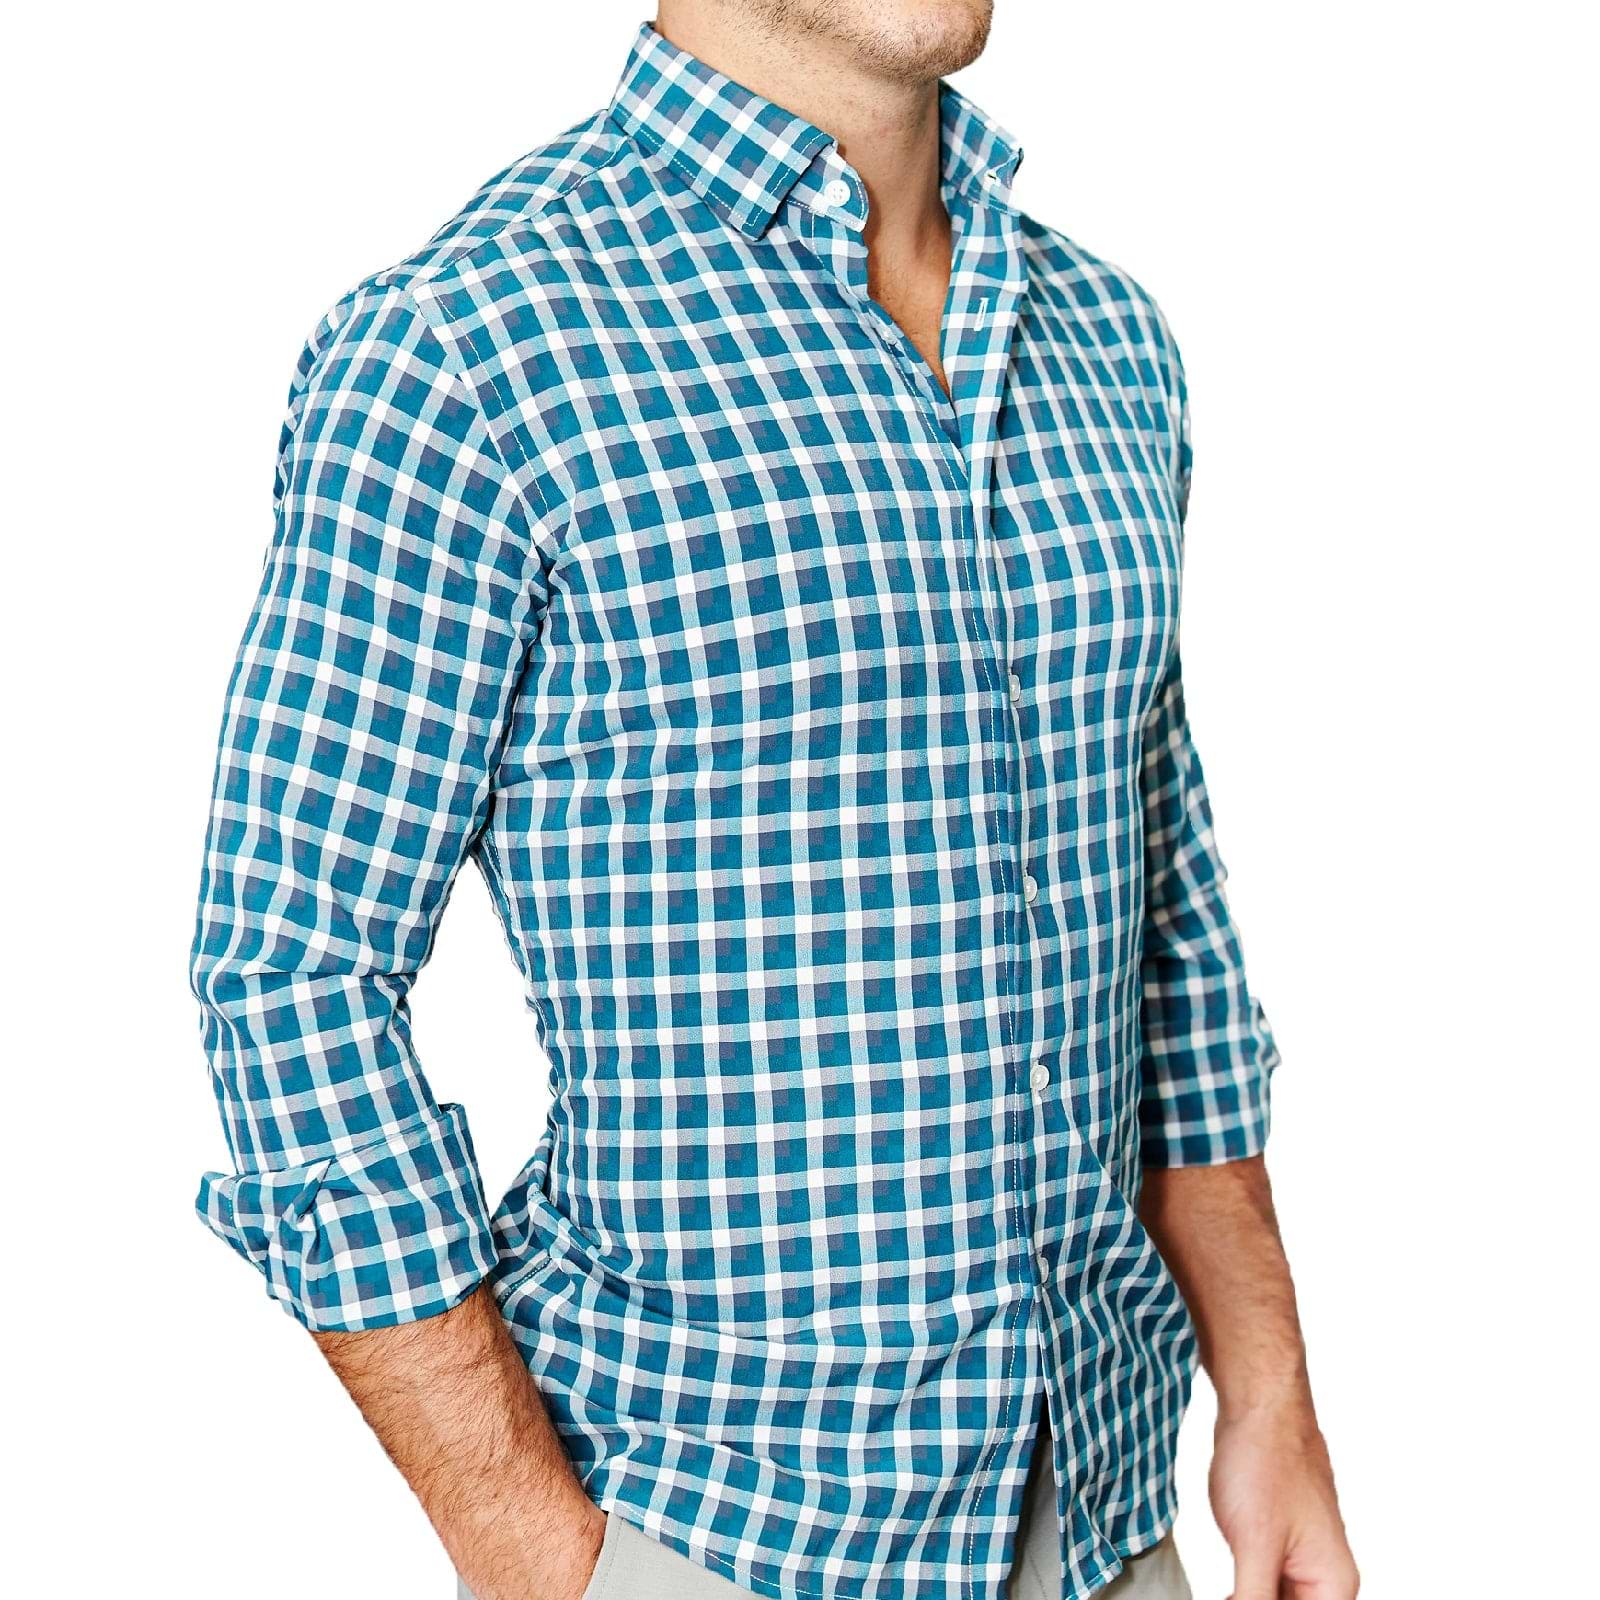 "The Bagley" Teal, Grey and White Triple Check - Classic Fit